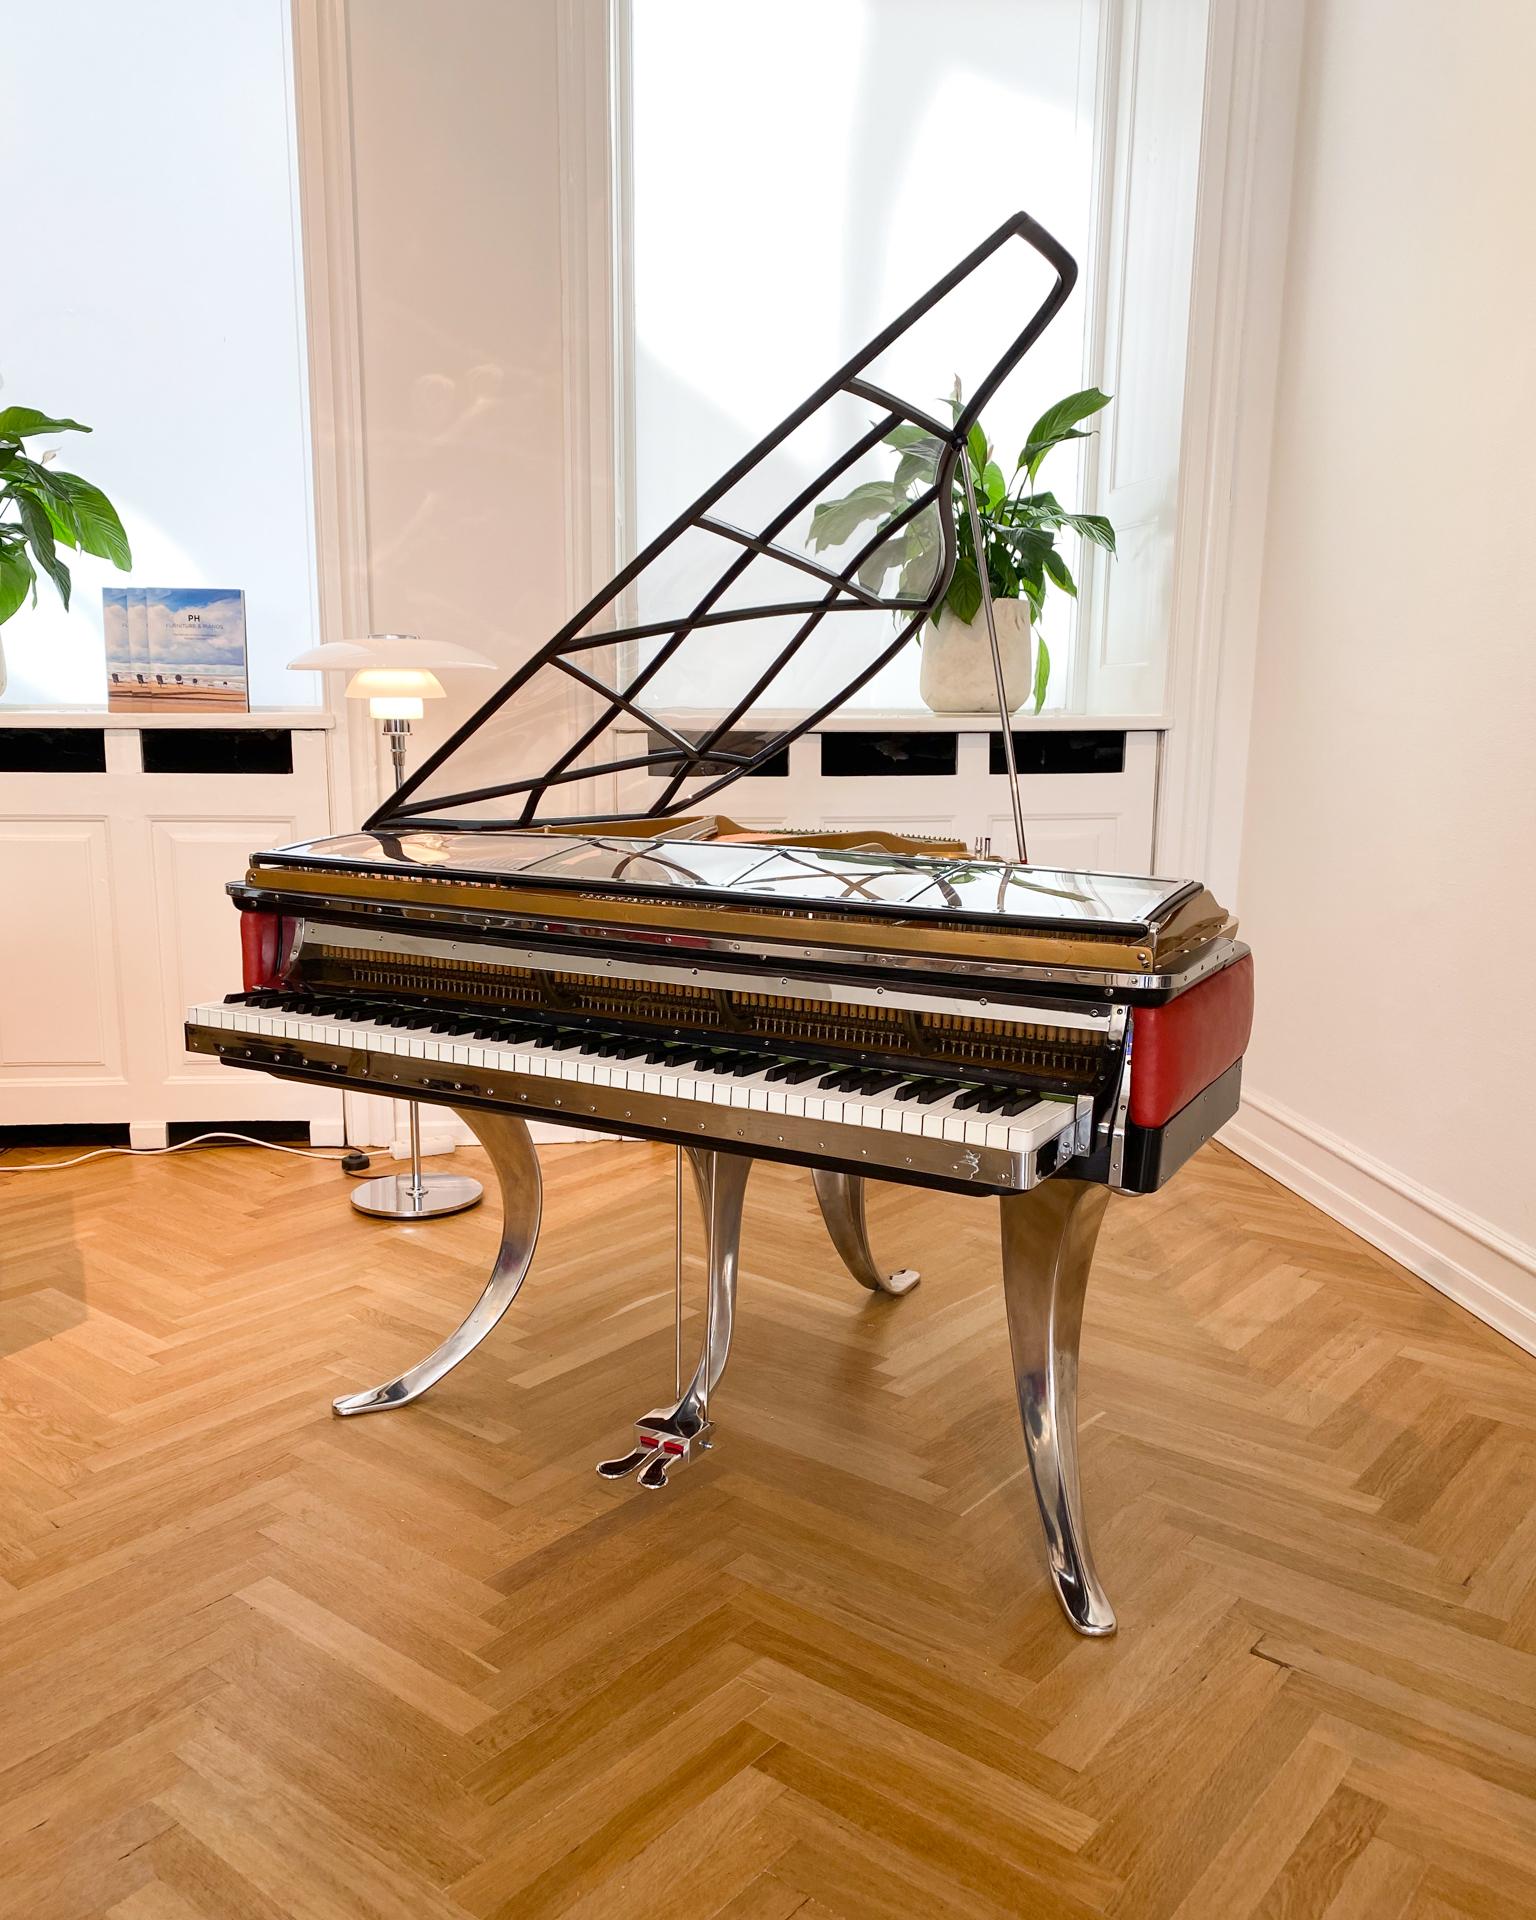 This PH Grand Piano, serial number 4600, was manufactured between 1935 and 1938. It is an excellent-conditioned vintage instrument that has been carefully restored. This unique piece comes with an exclusive provenance, having belonged to the same